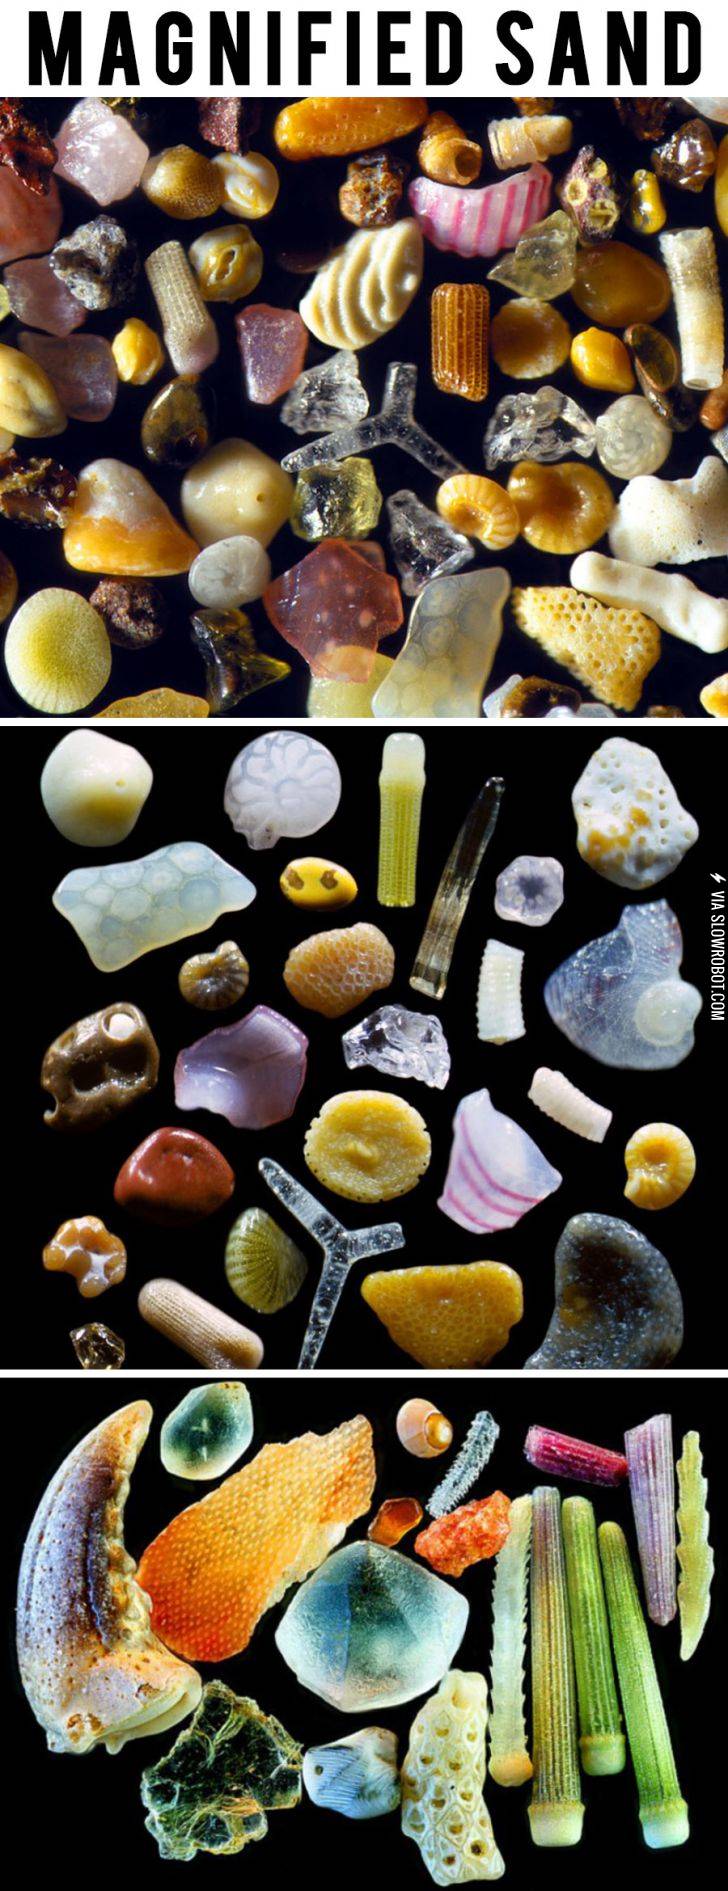 Magnified+sand.